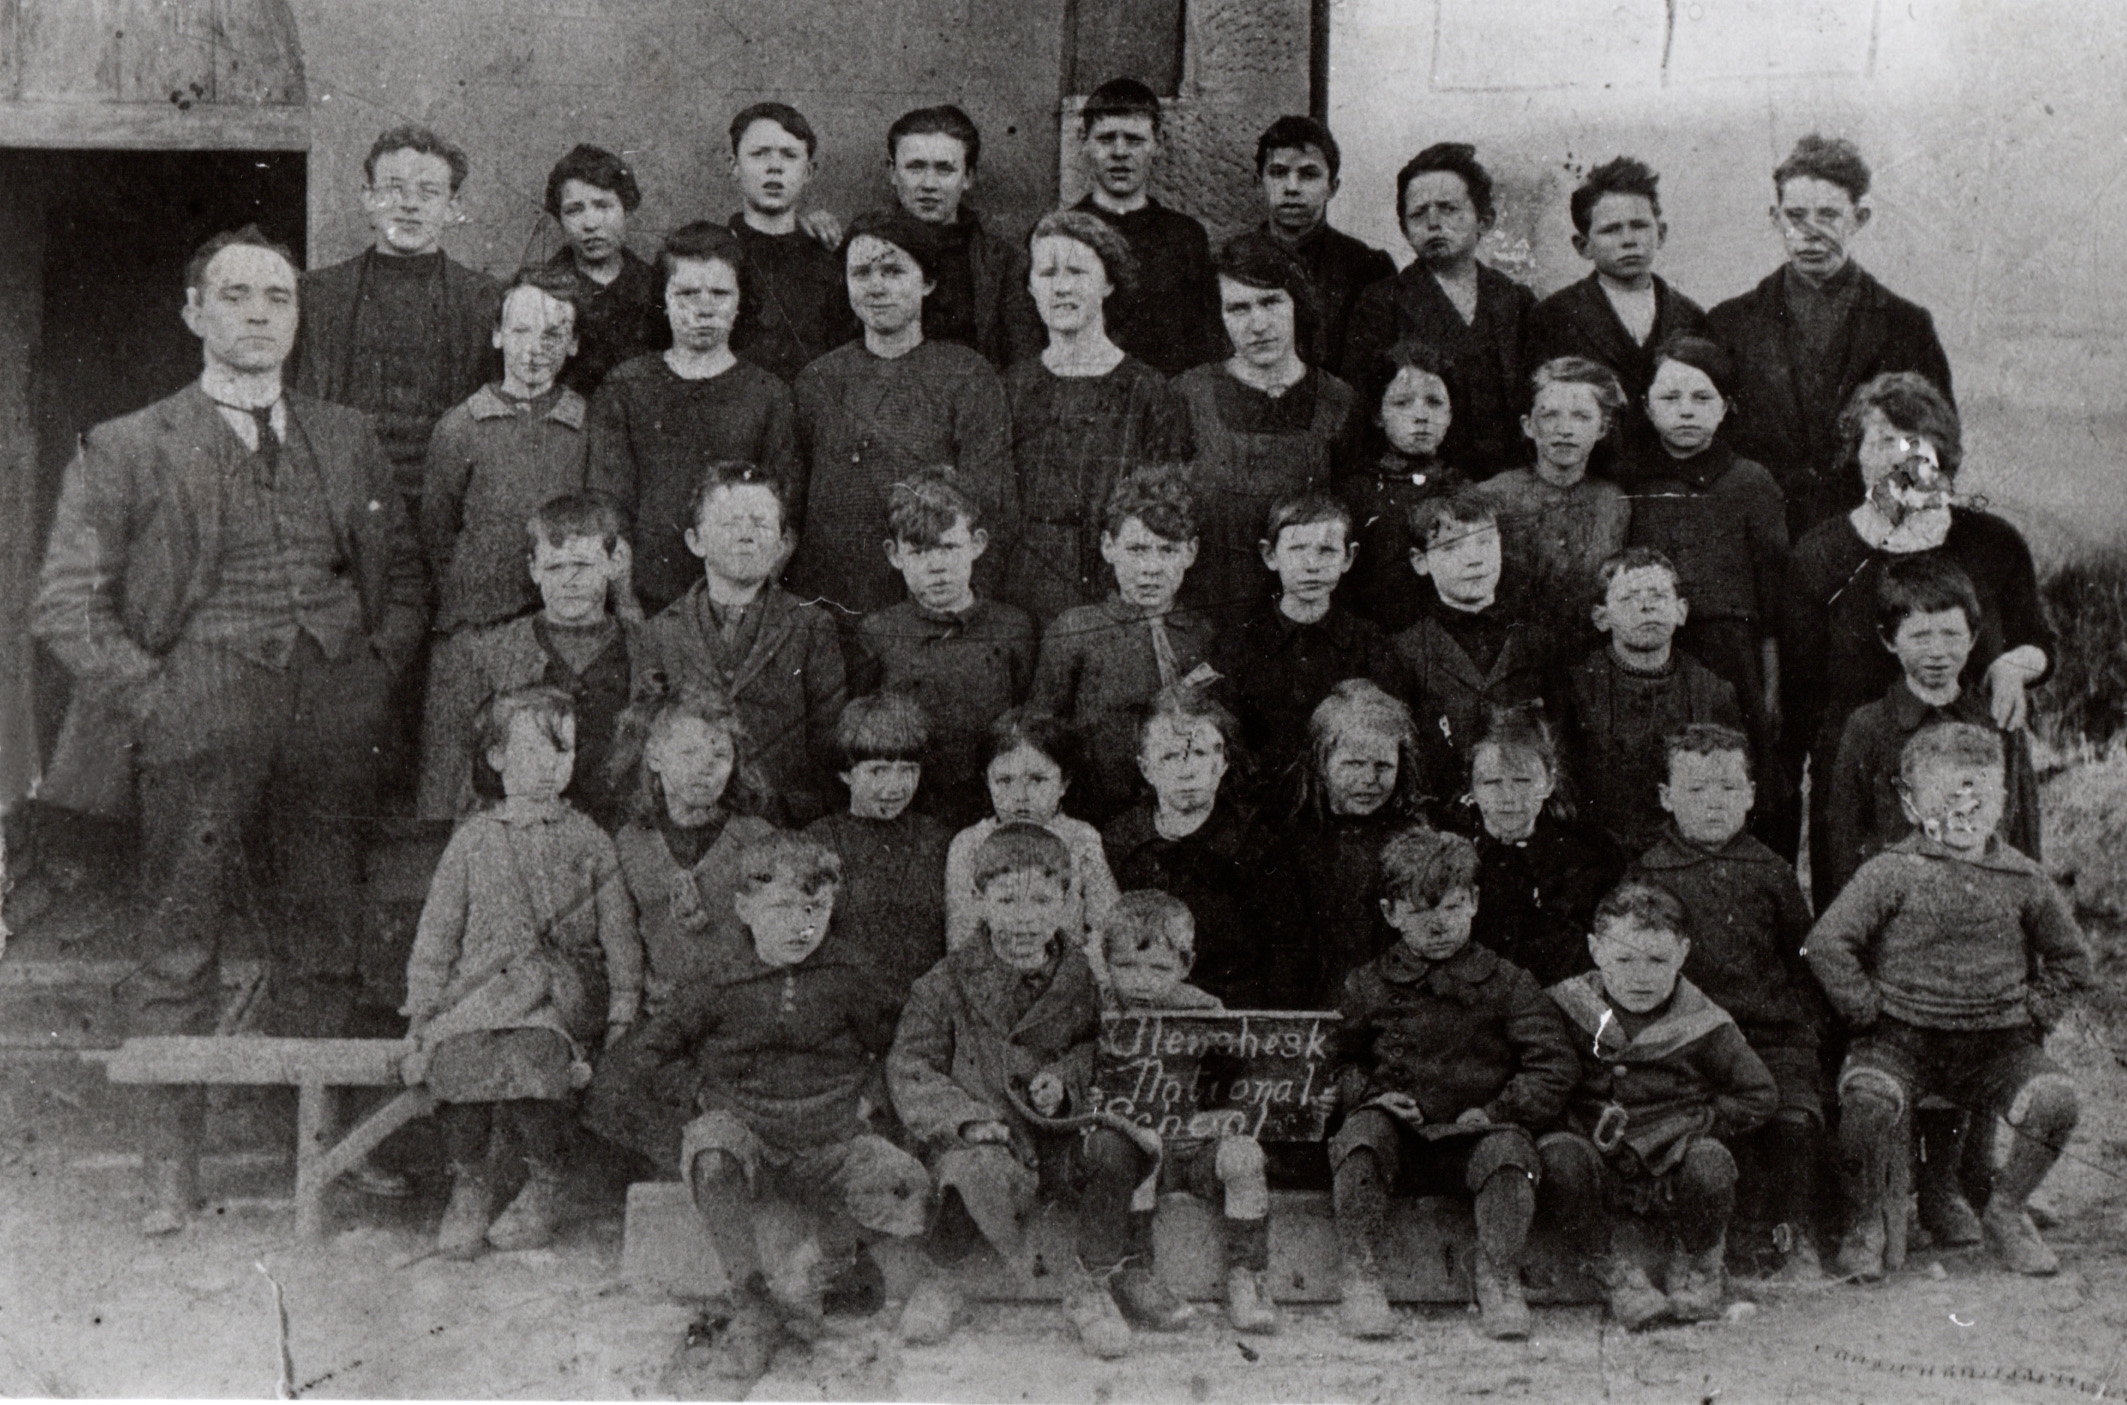 Glenshesk School, late 1920's pr early 1930's, with Master Kelly and his wife in photo